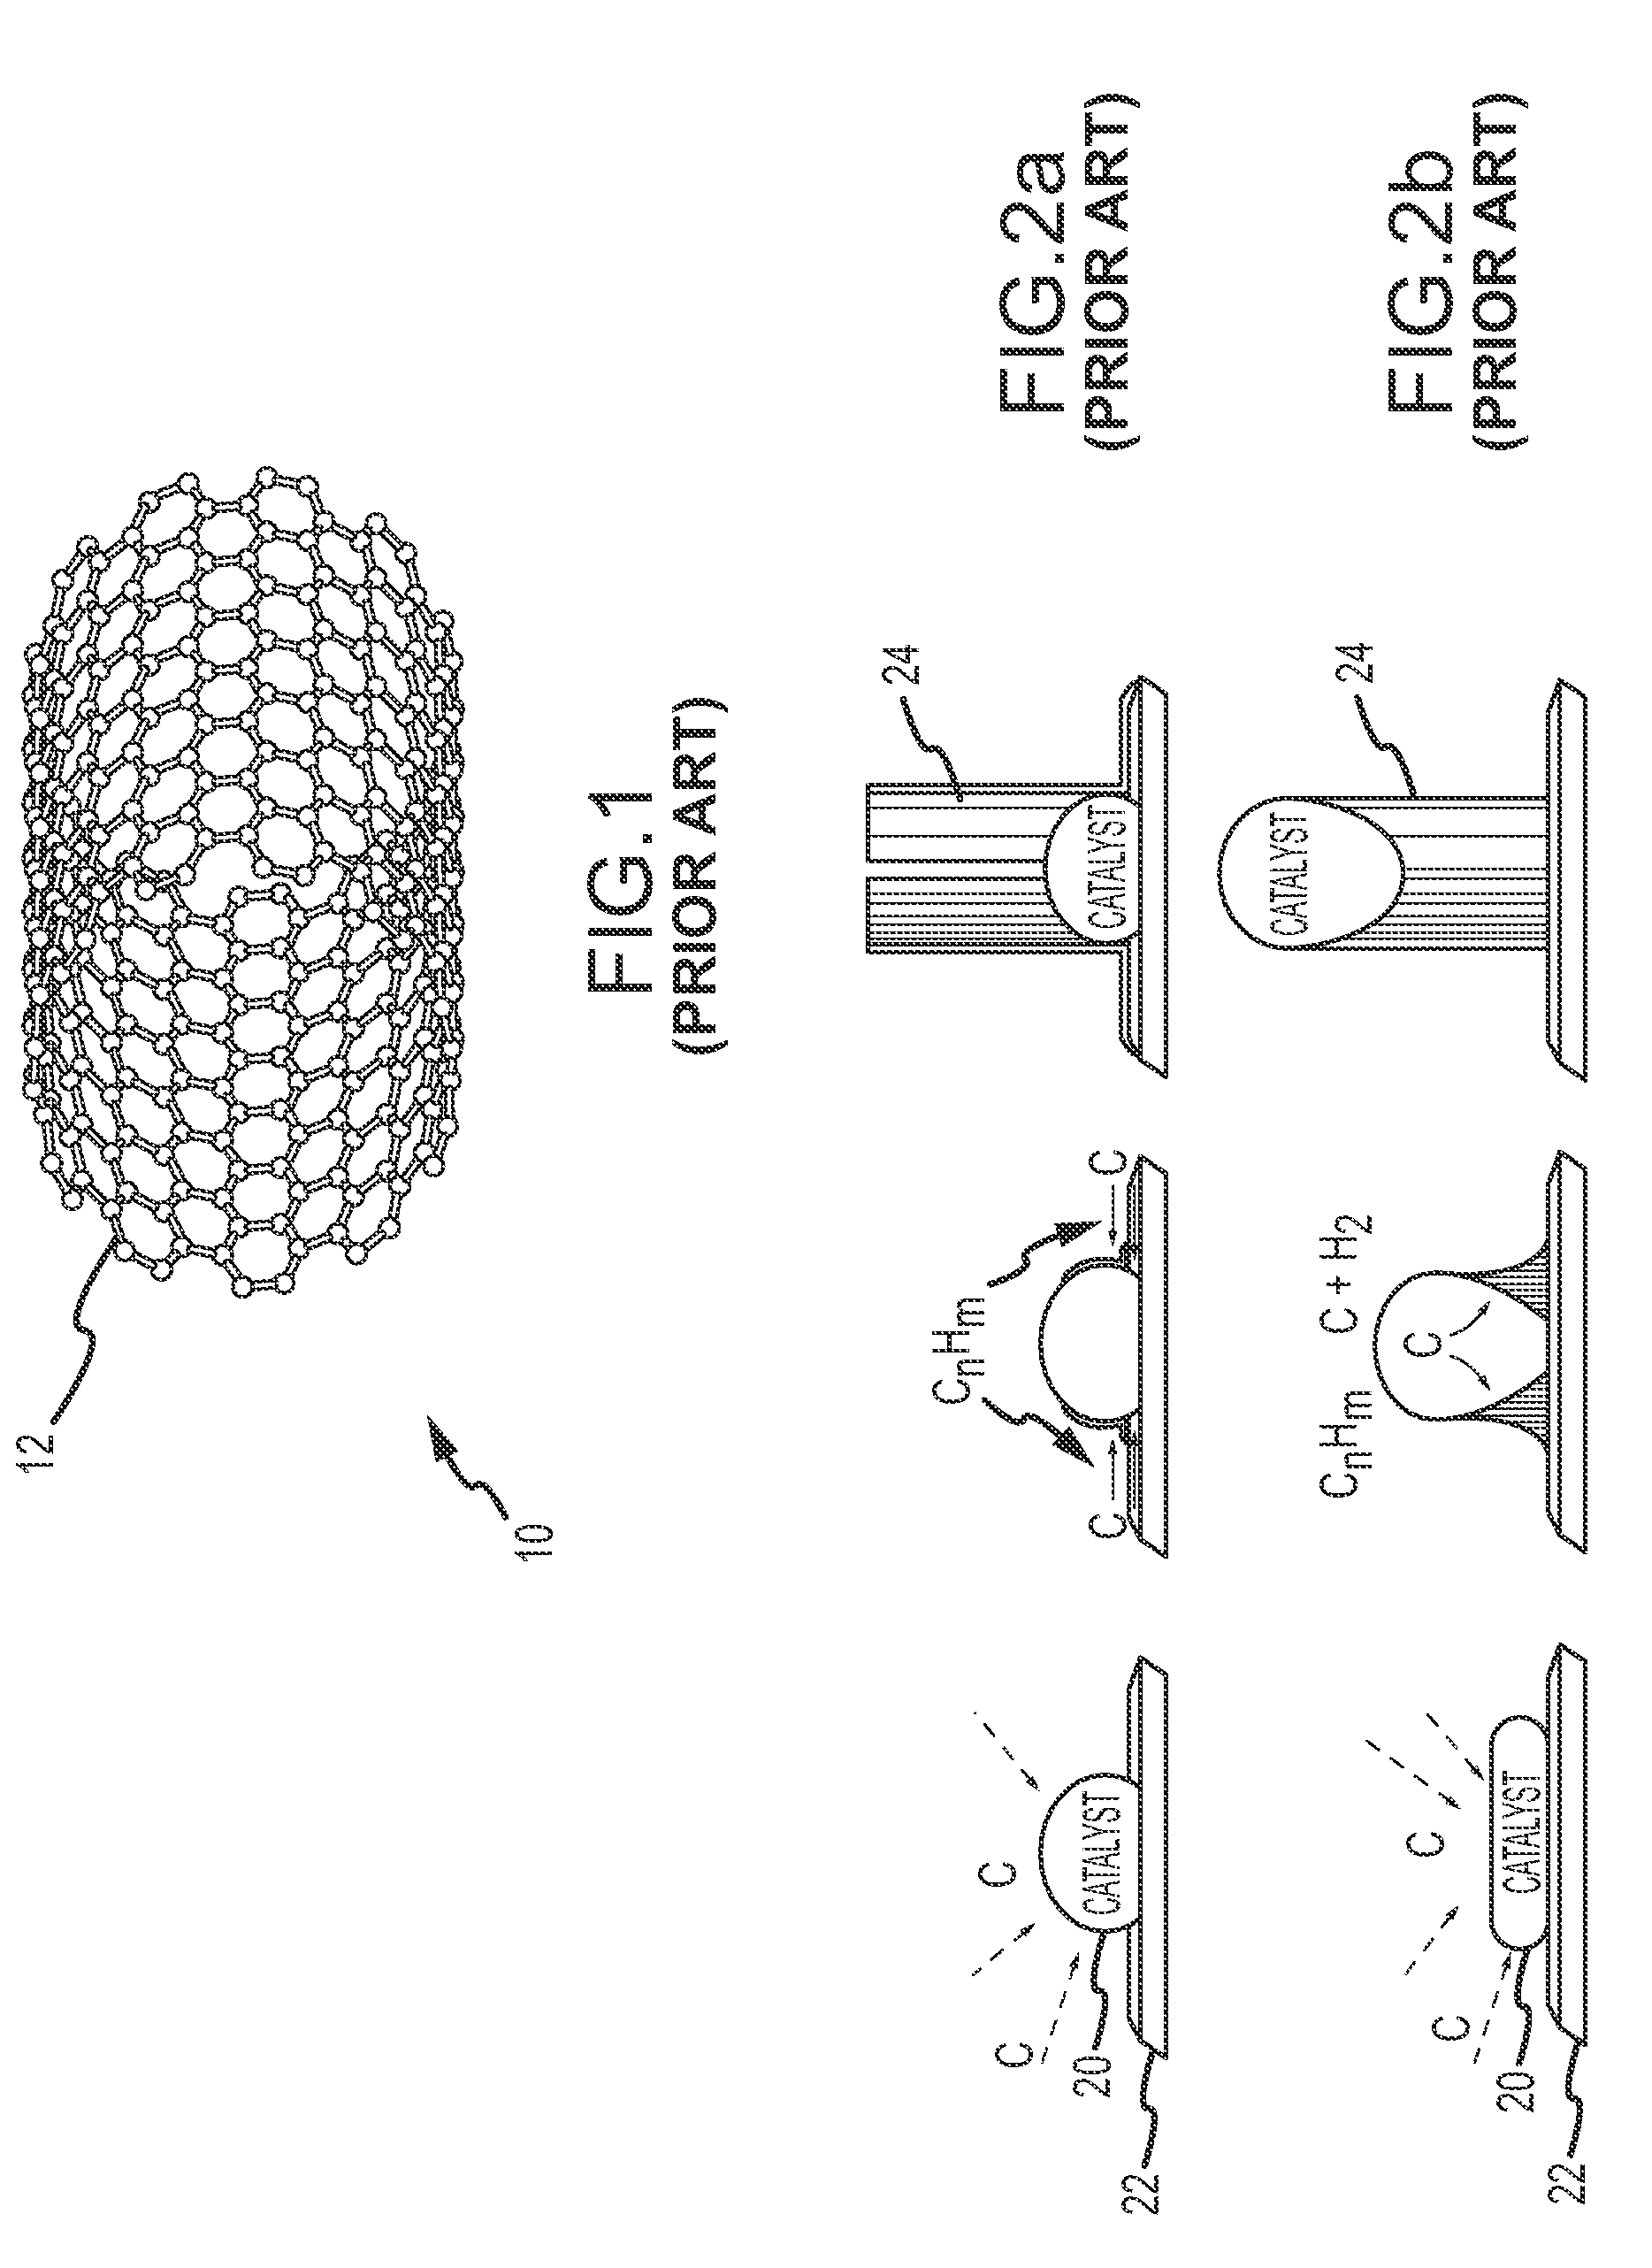 System and method for nanotube growth via Ion implantation using a catalytic transmembrane